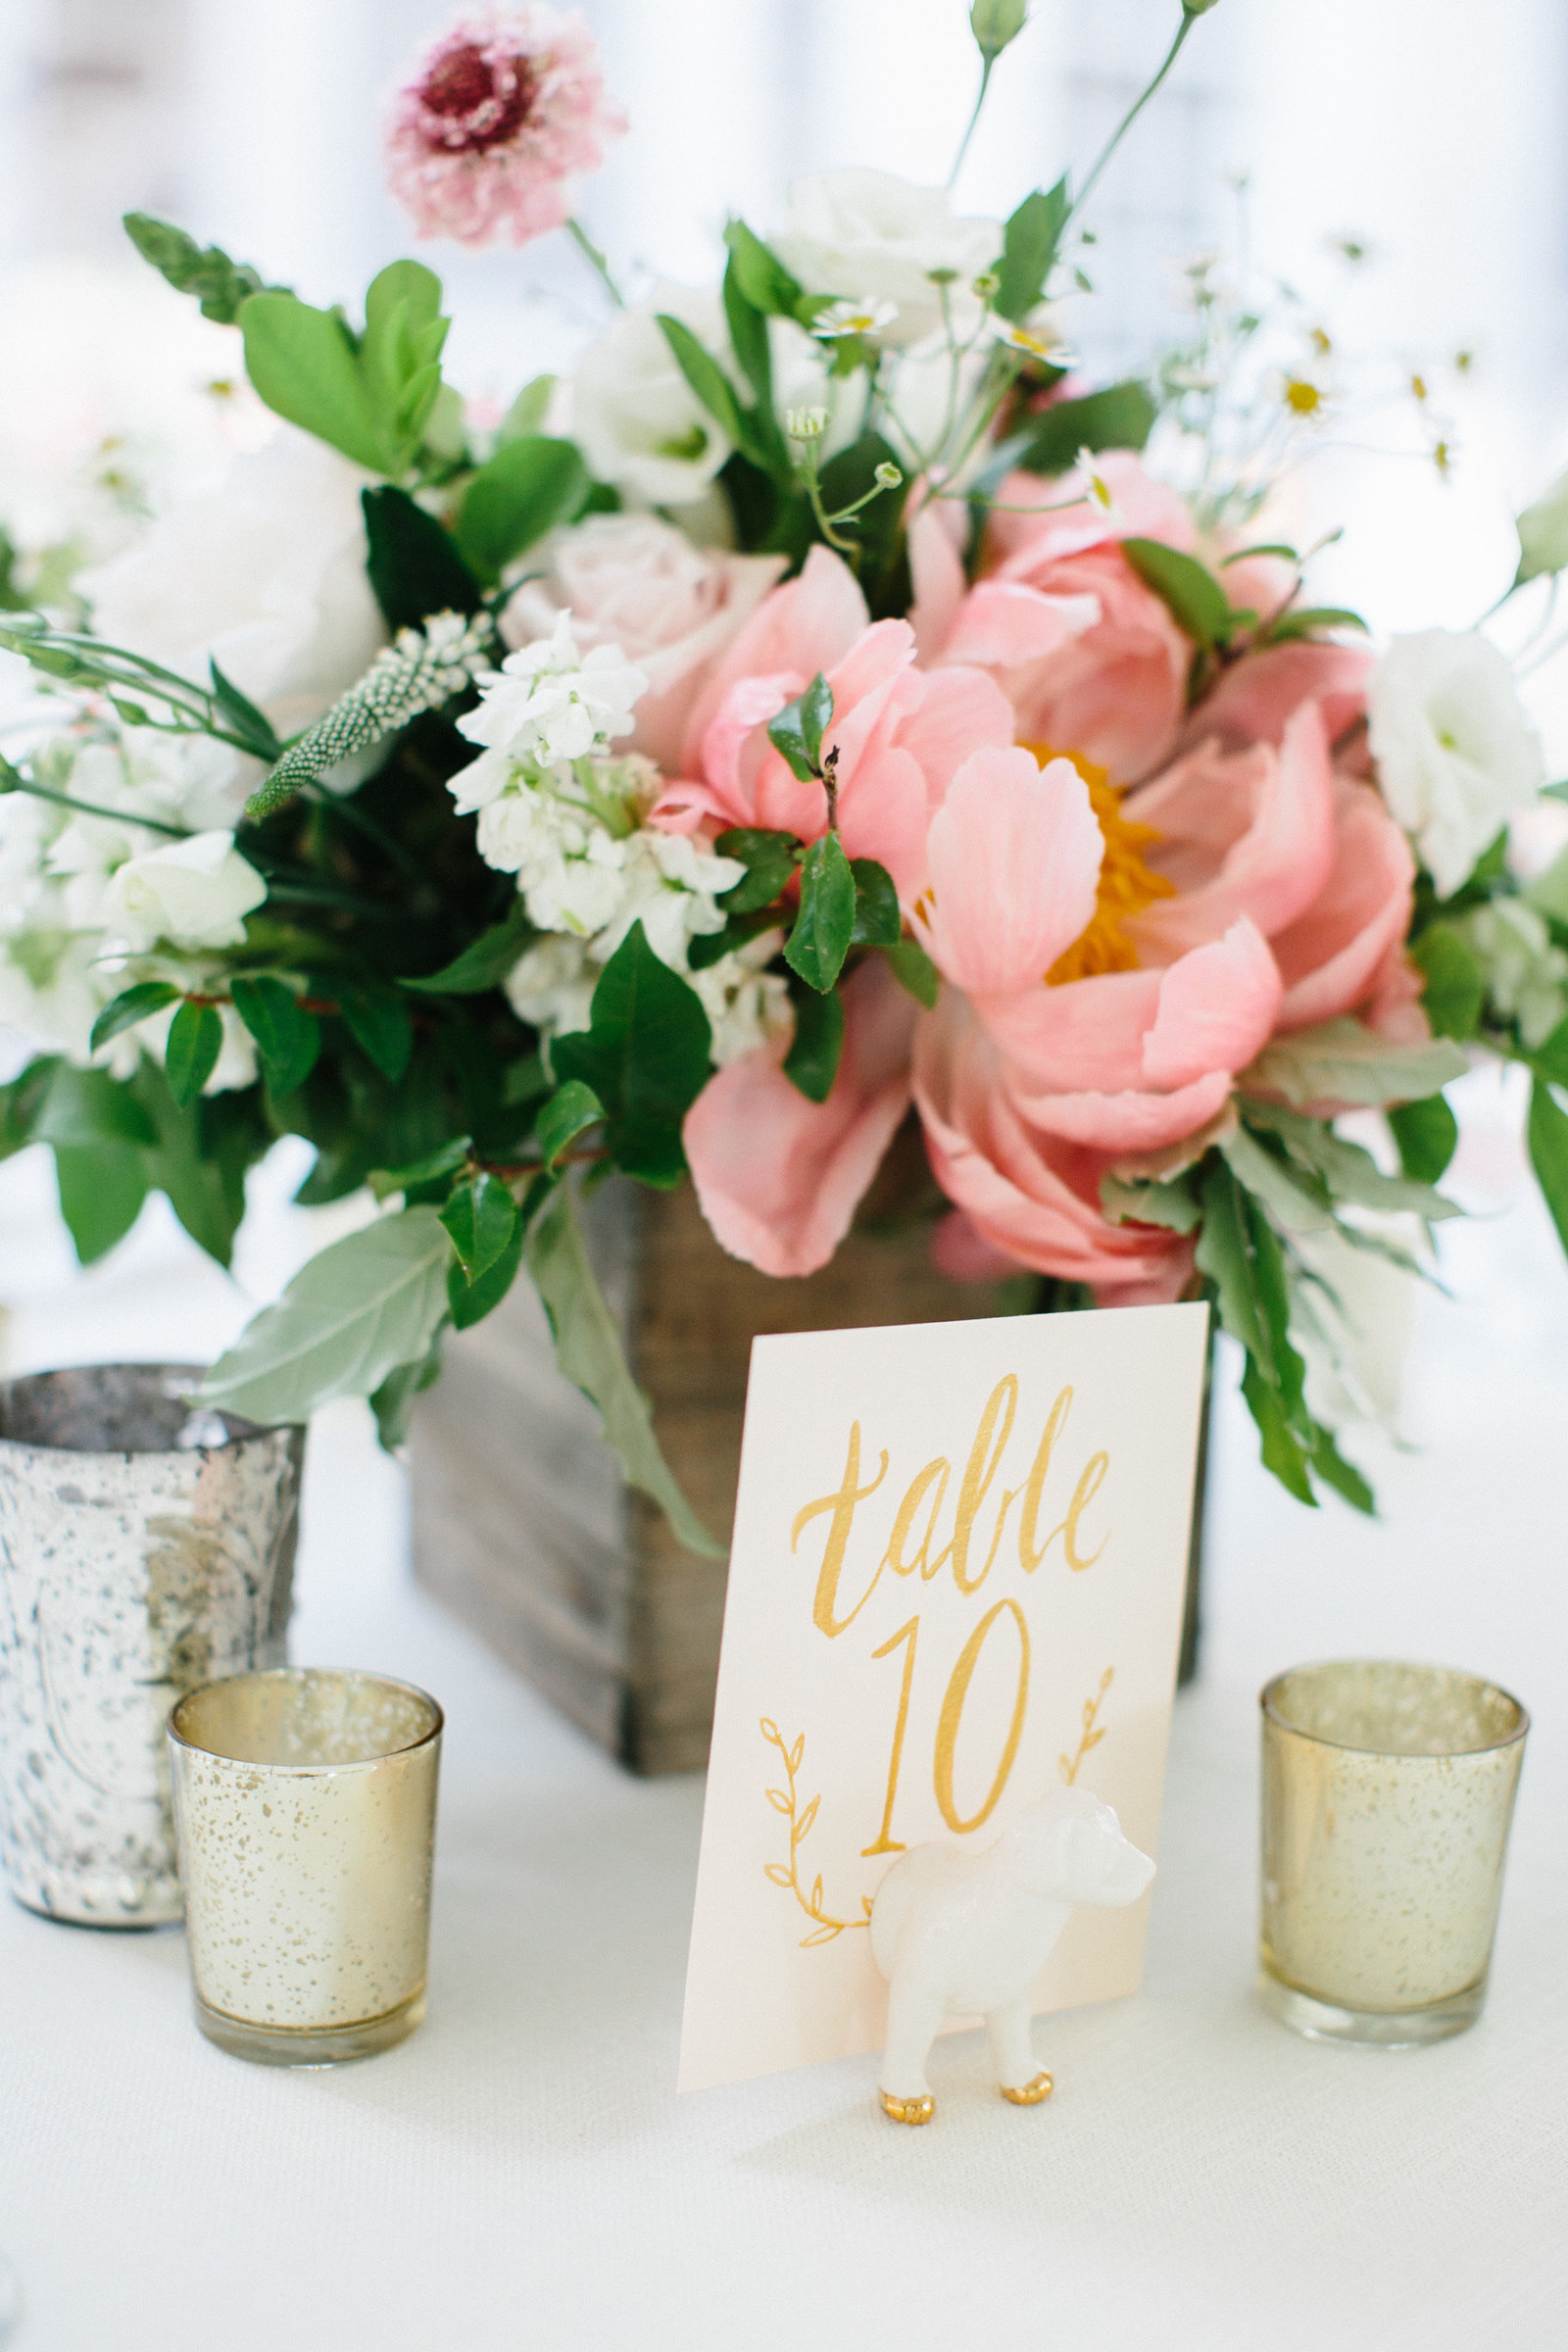 Gorgeous foral wedding table arrangements  at this summer wedding.